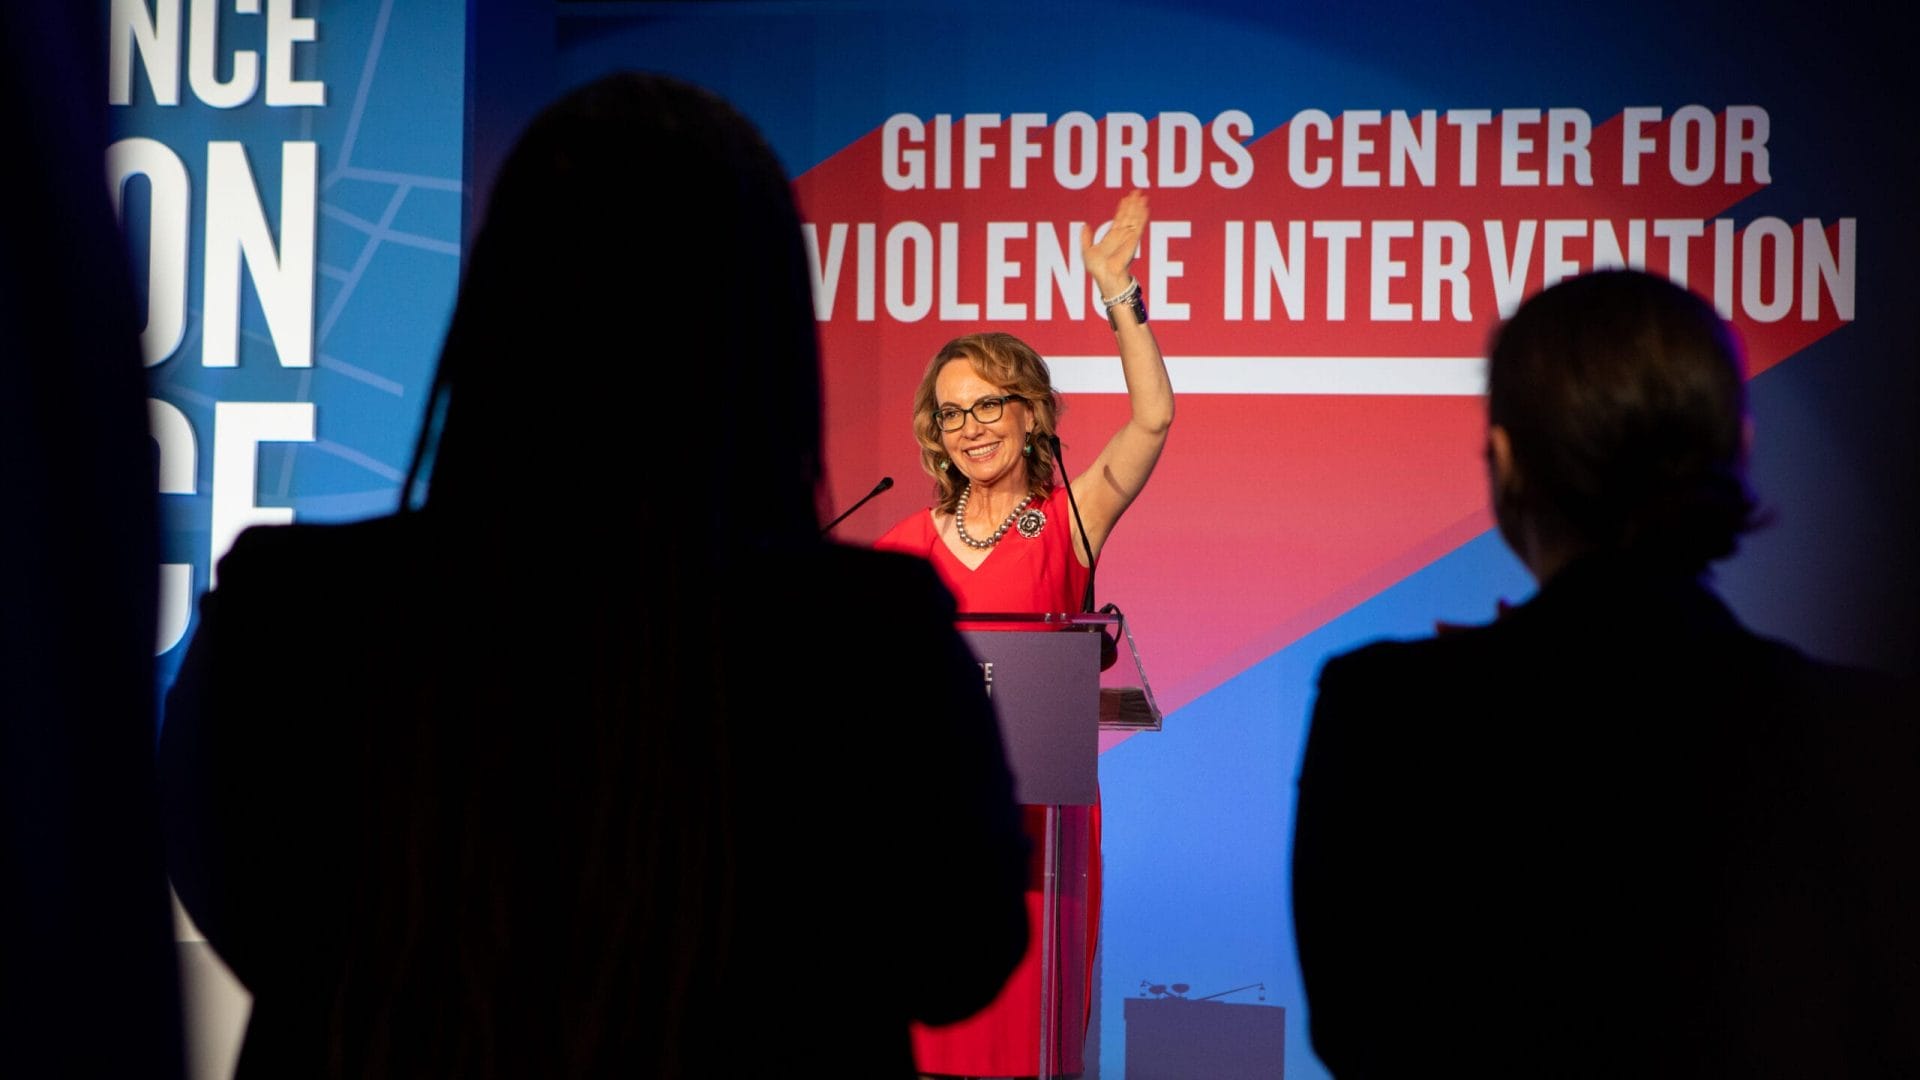 Gabby Giffords speaks at the Giffords Center for Violence Intervention conference. 